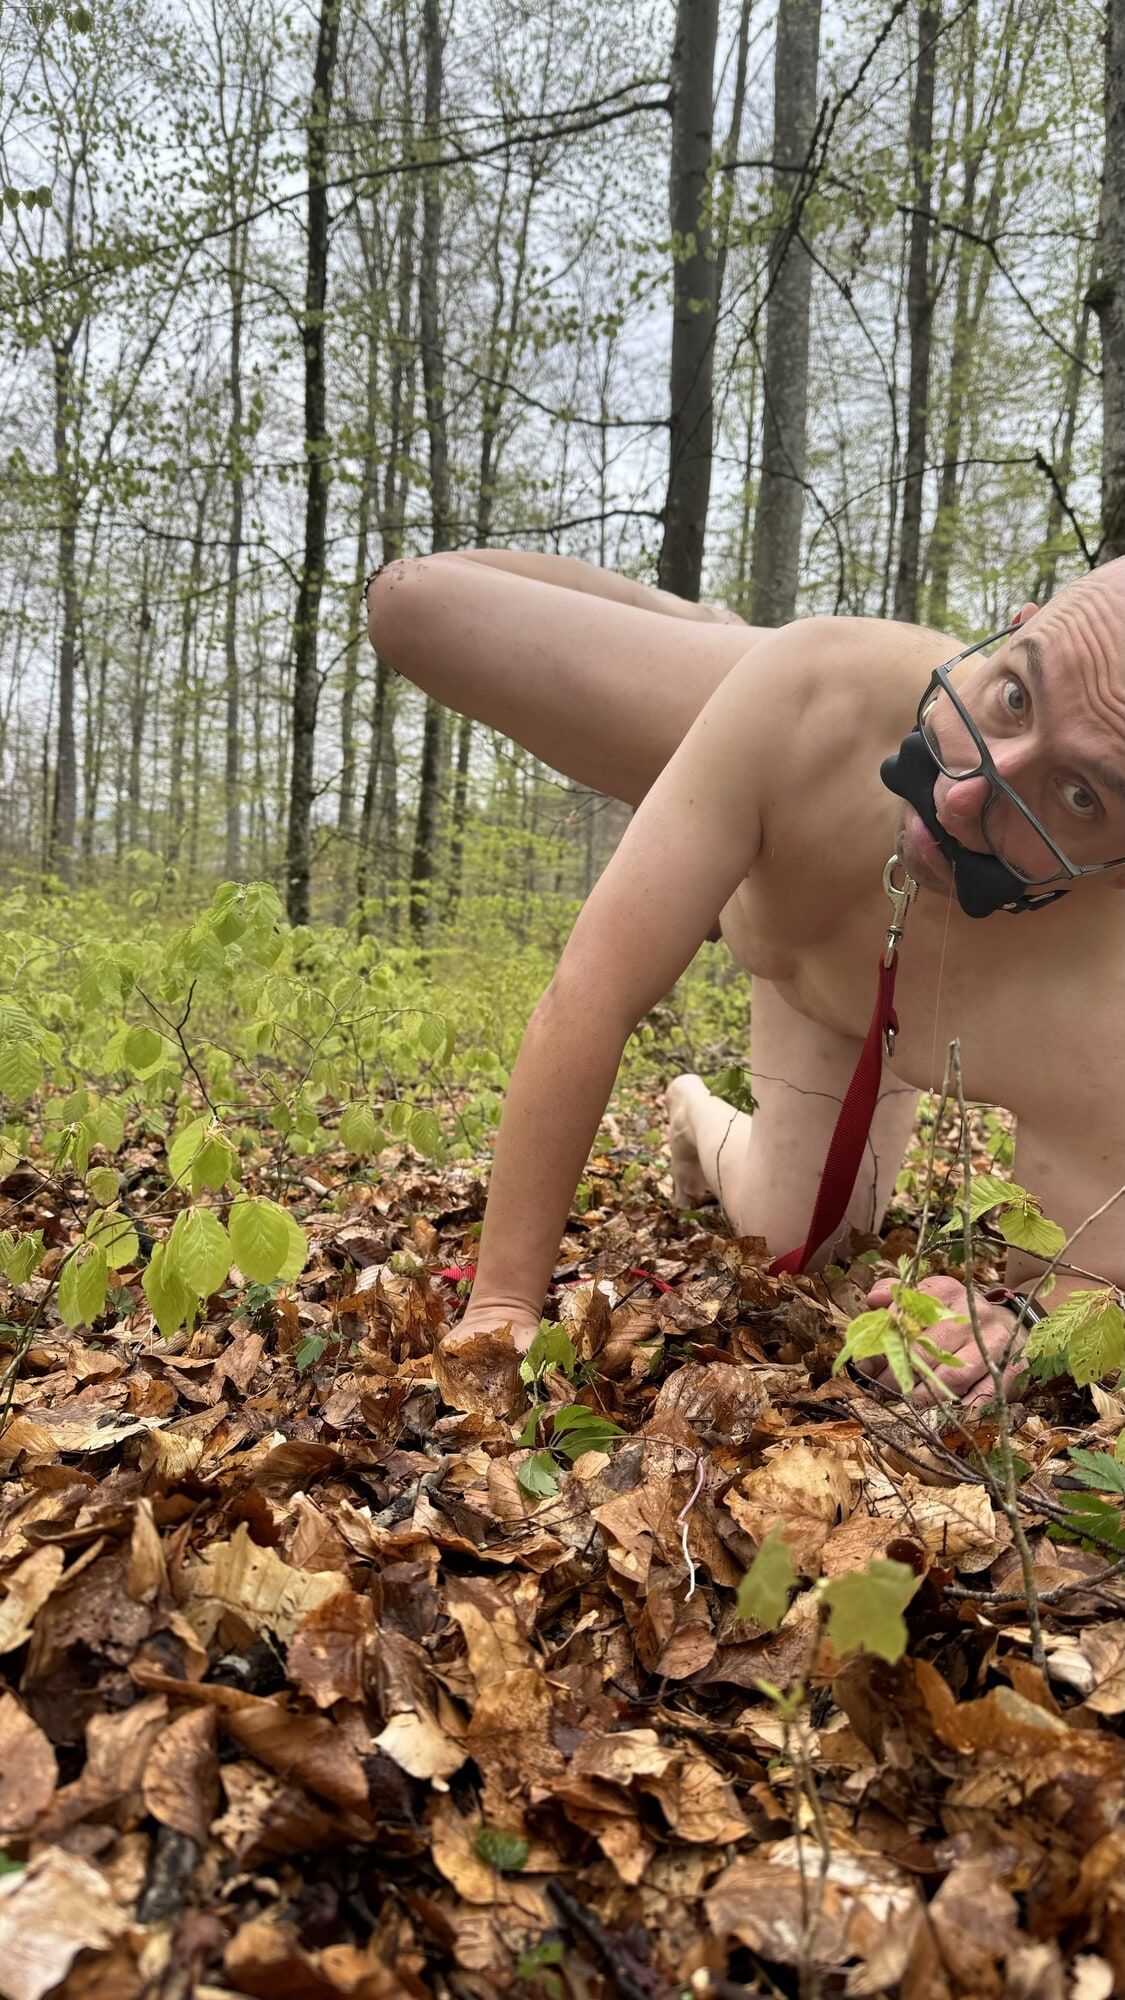 Slave whore naked in the forest #3